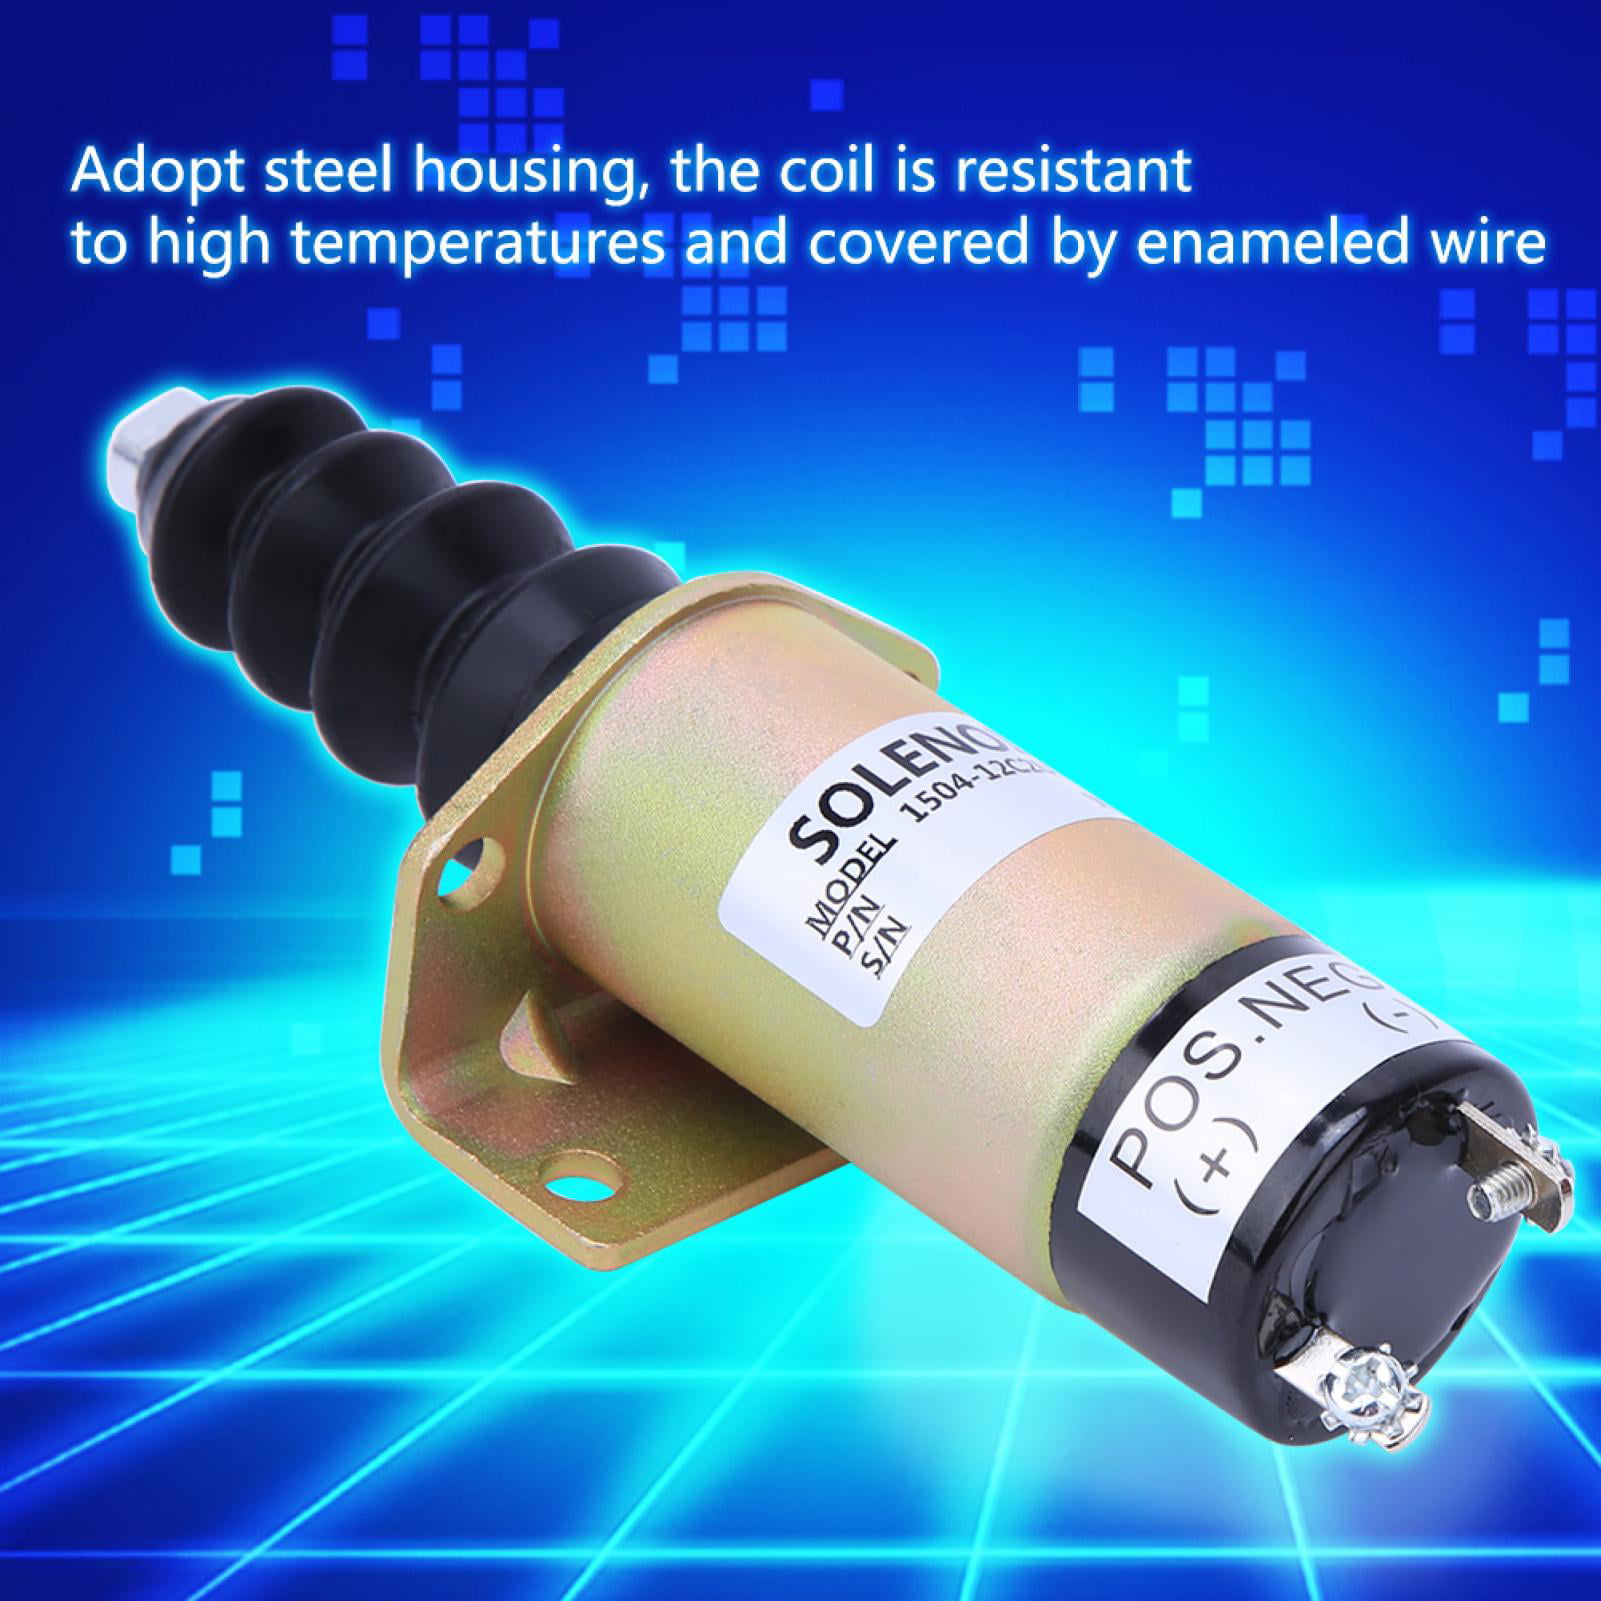 Steel housing Steel housing Motor Replacement kit 12V Shut-Off Solenoid Valve high Temperature Resistant enameled Wire Coil 1504-12C2U1B1S1 